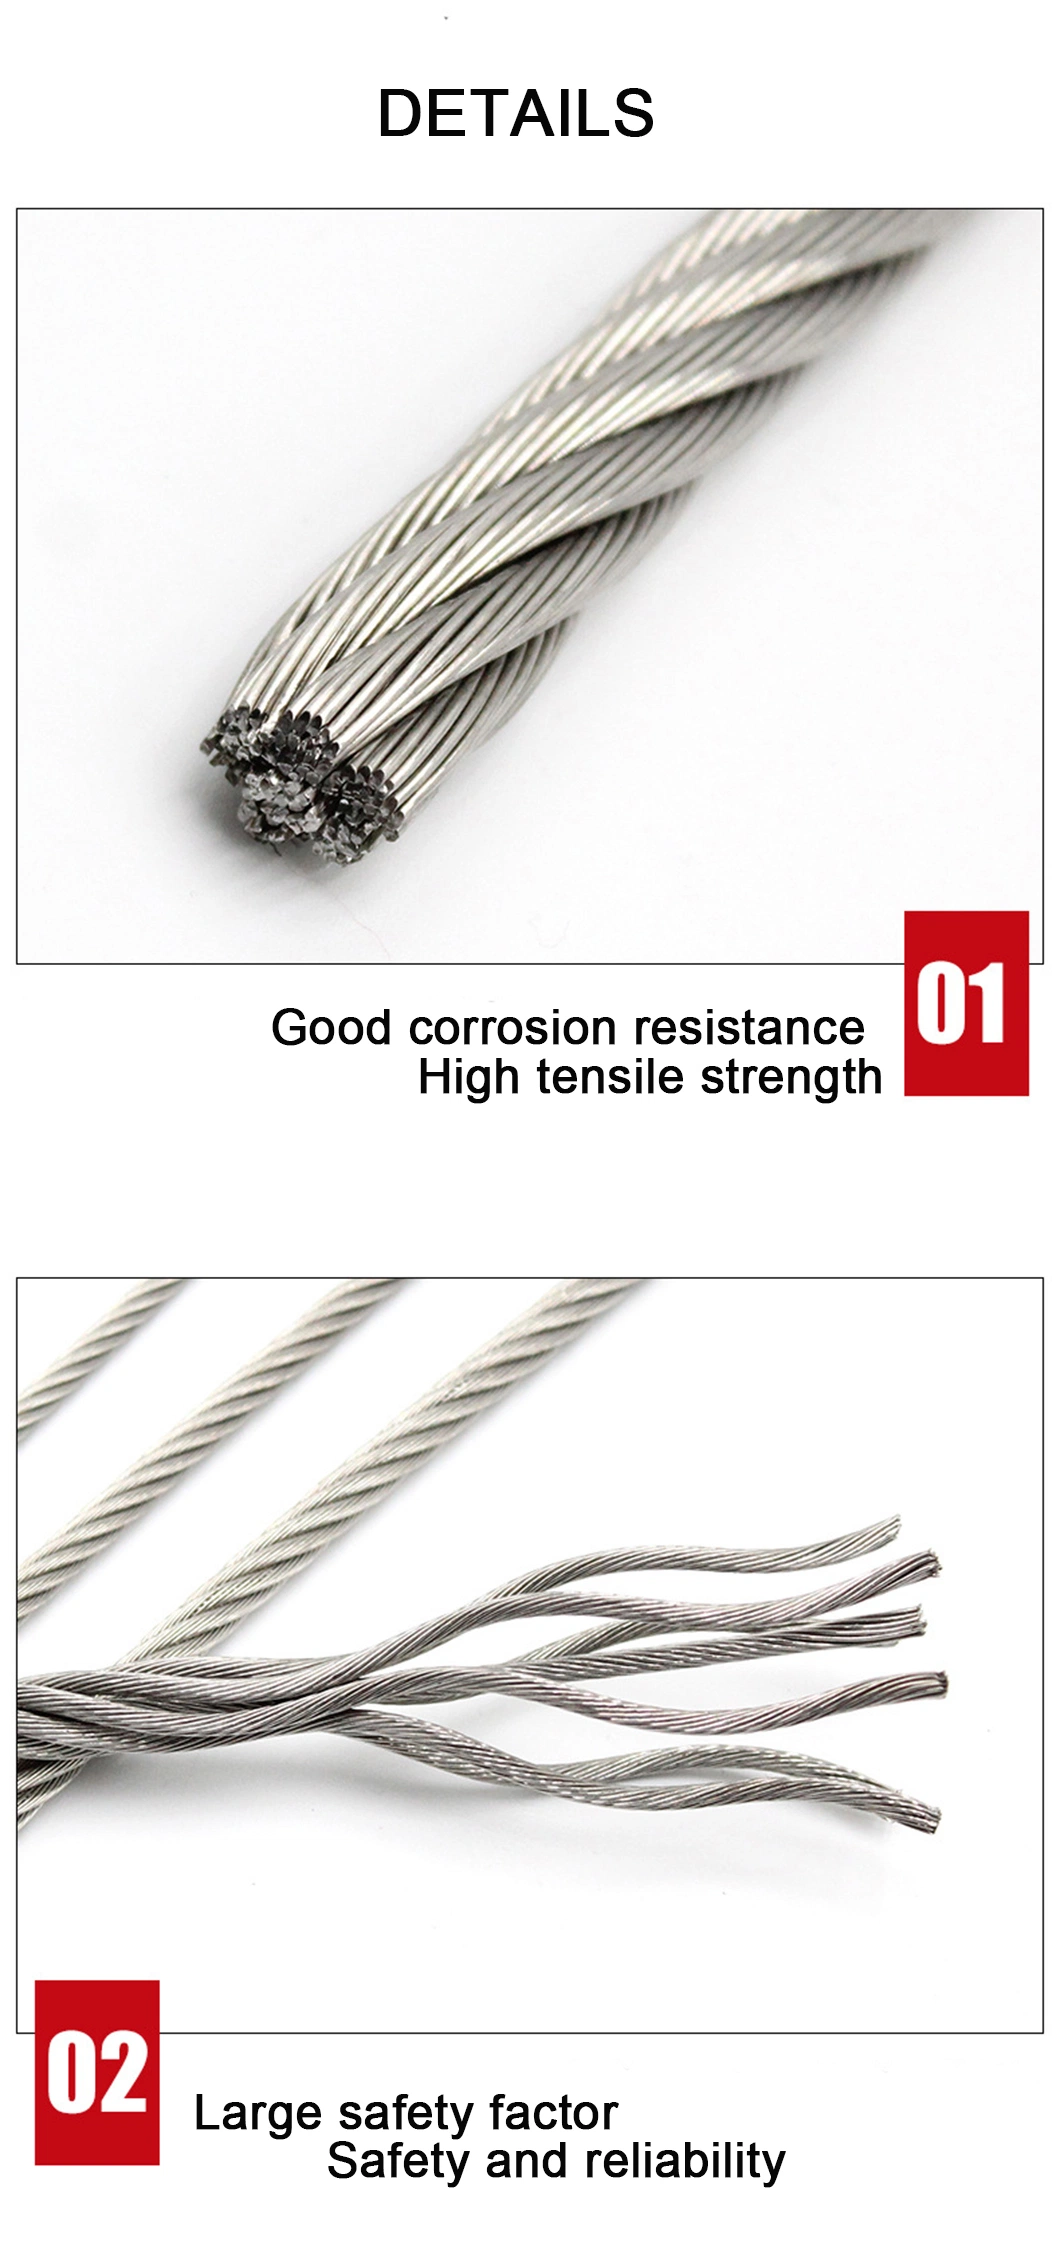 Stainless Steel Wire Ropes for Balustrades